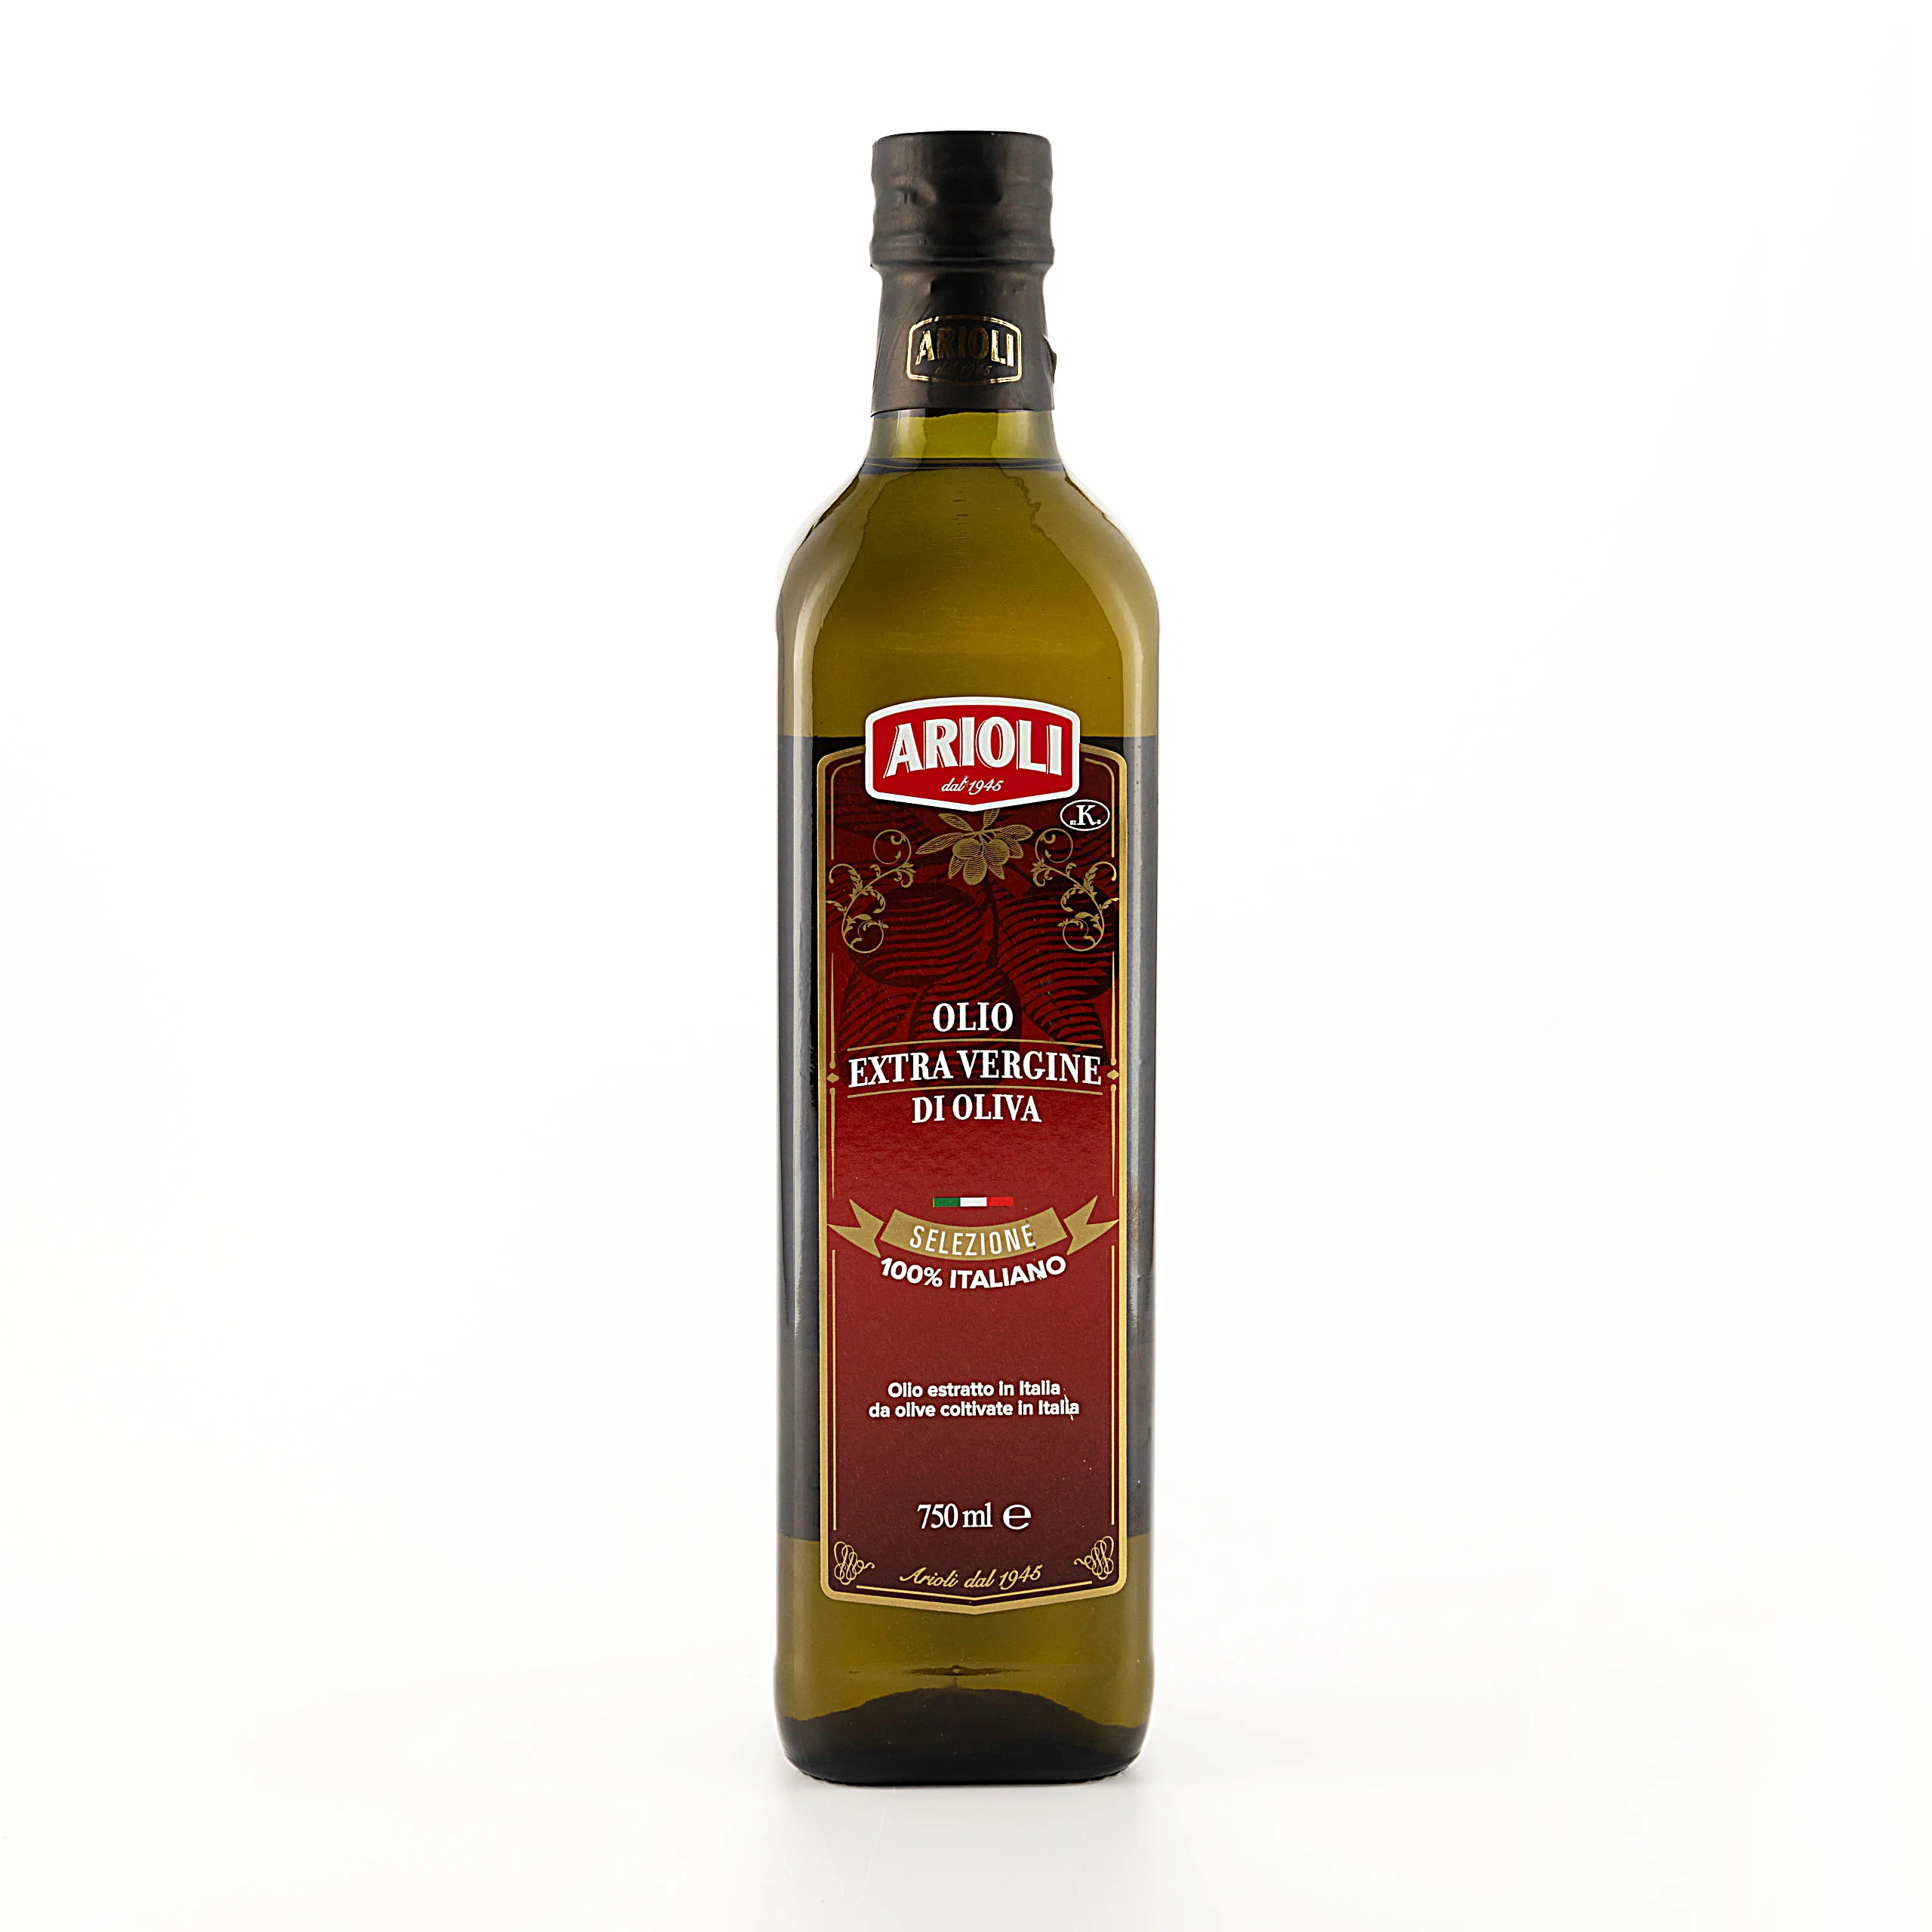 Top Quality Extra Virgin Olive Oil ARIOLI SELEZIONE for dressing 75cl.